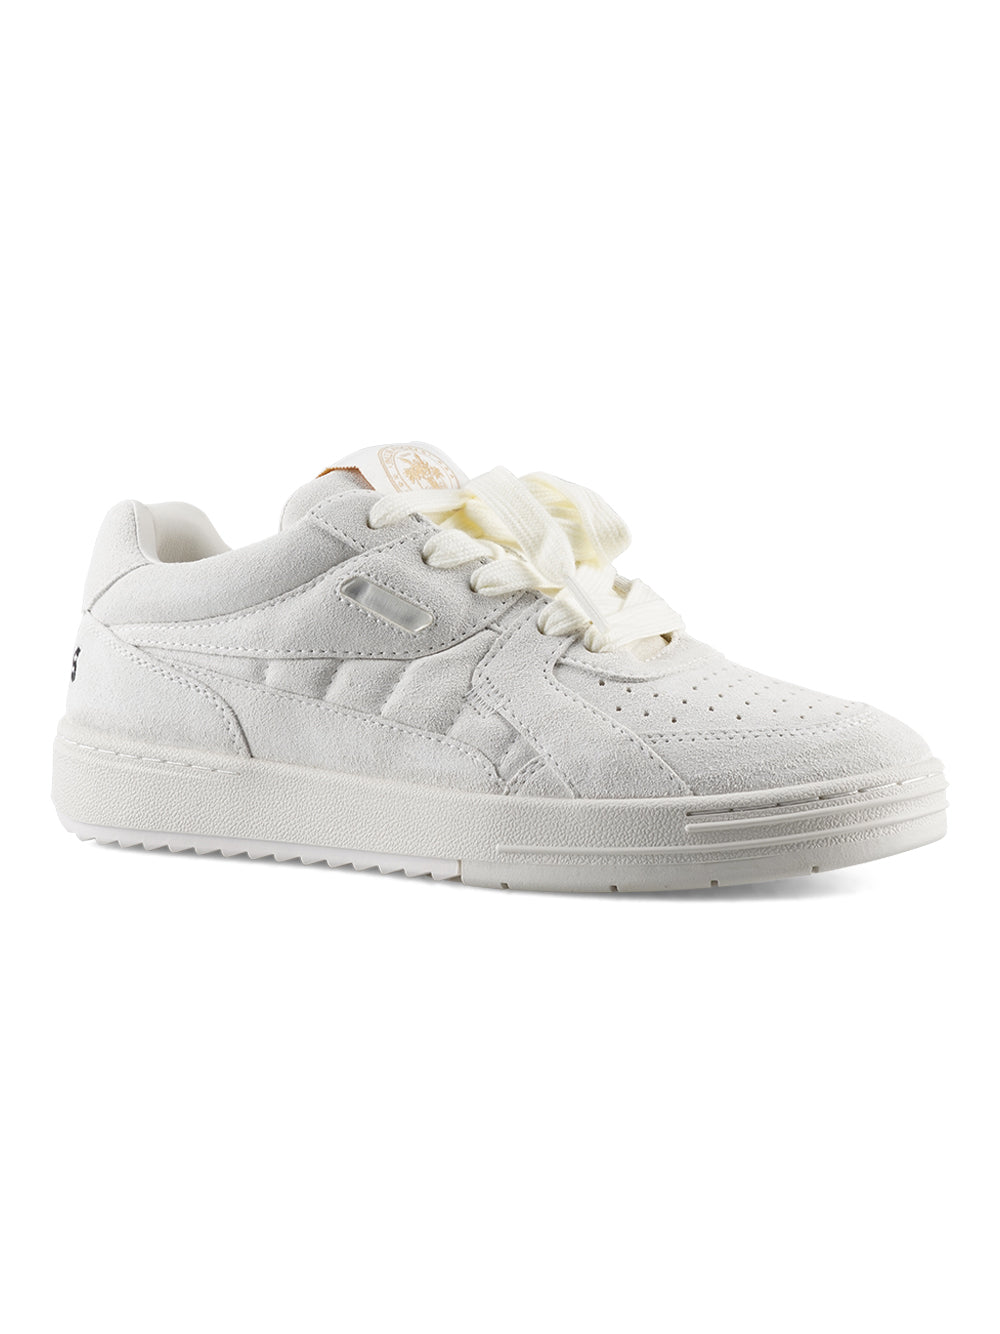 PALM ANGELS WHITE SNEAKER